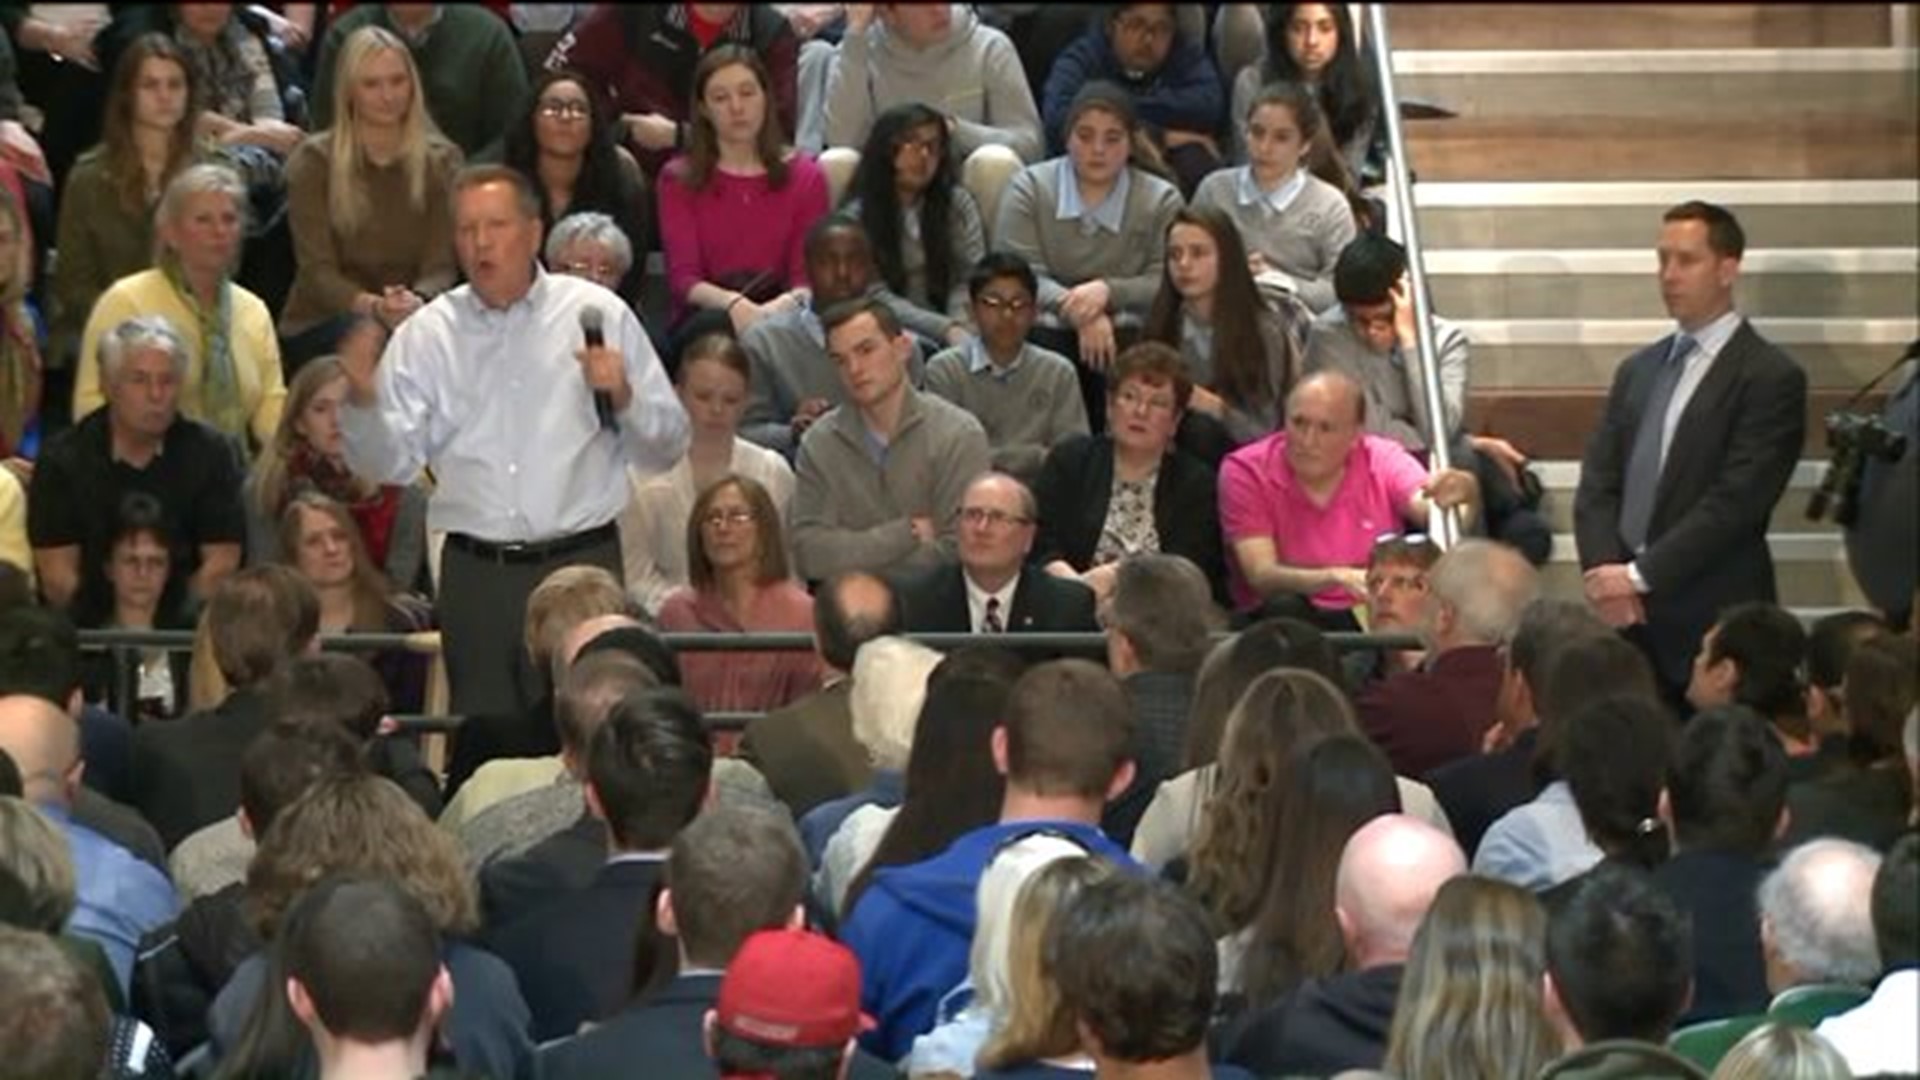 Crowds cheer on presidential candidate John Kasich at Sacred Heart